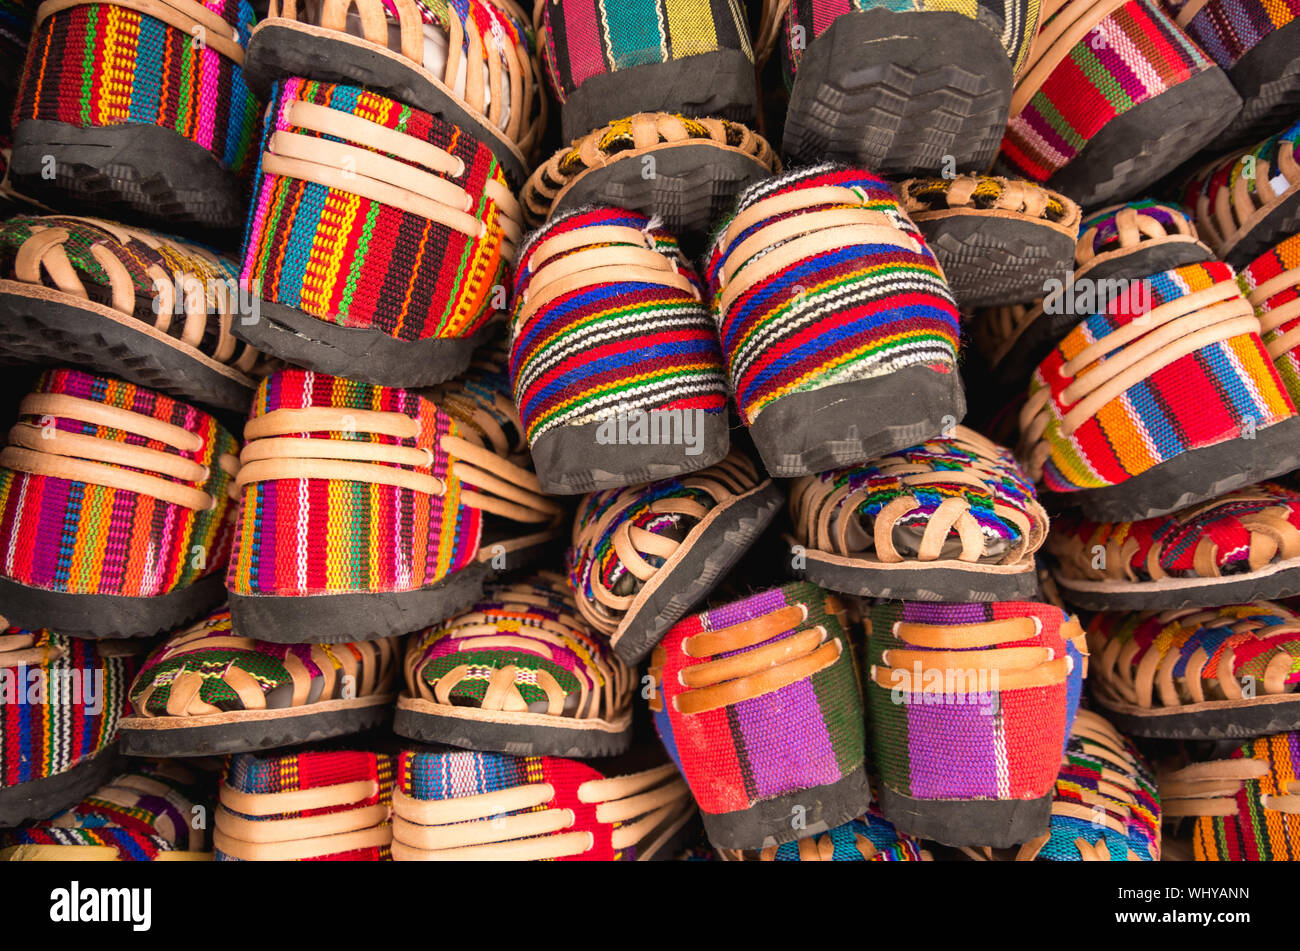 Colorful Mexican traditional sandals Stock Photo